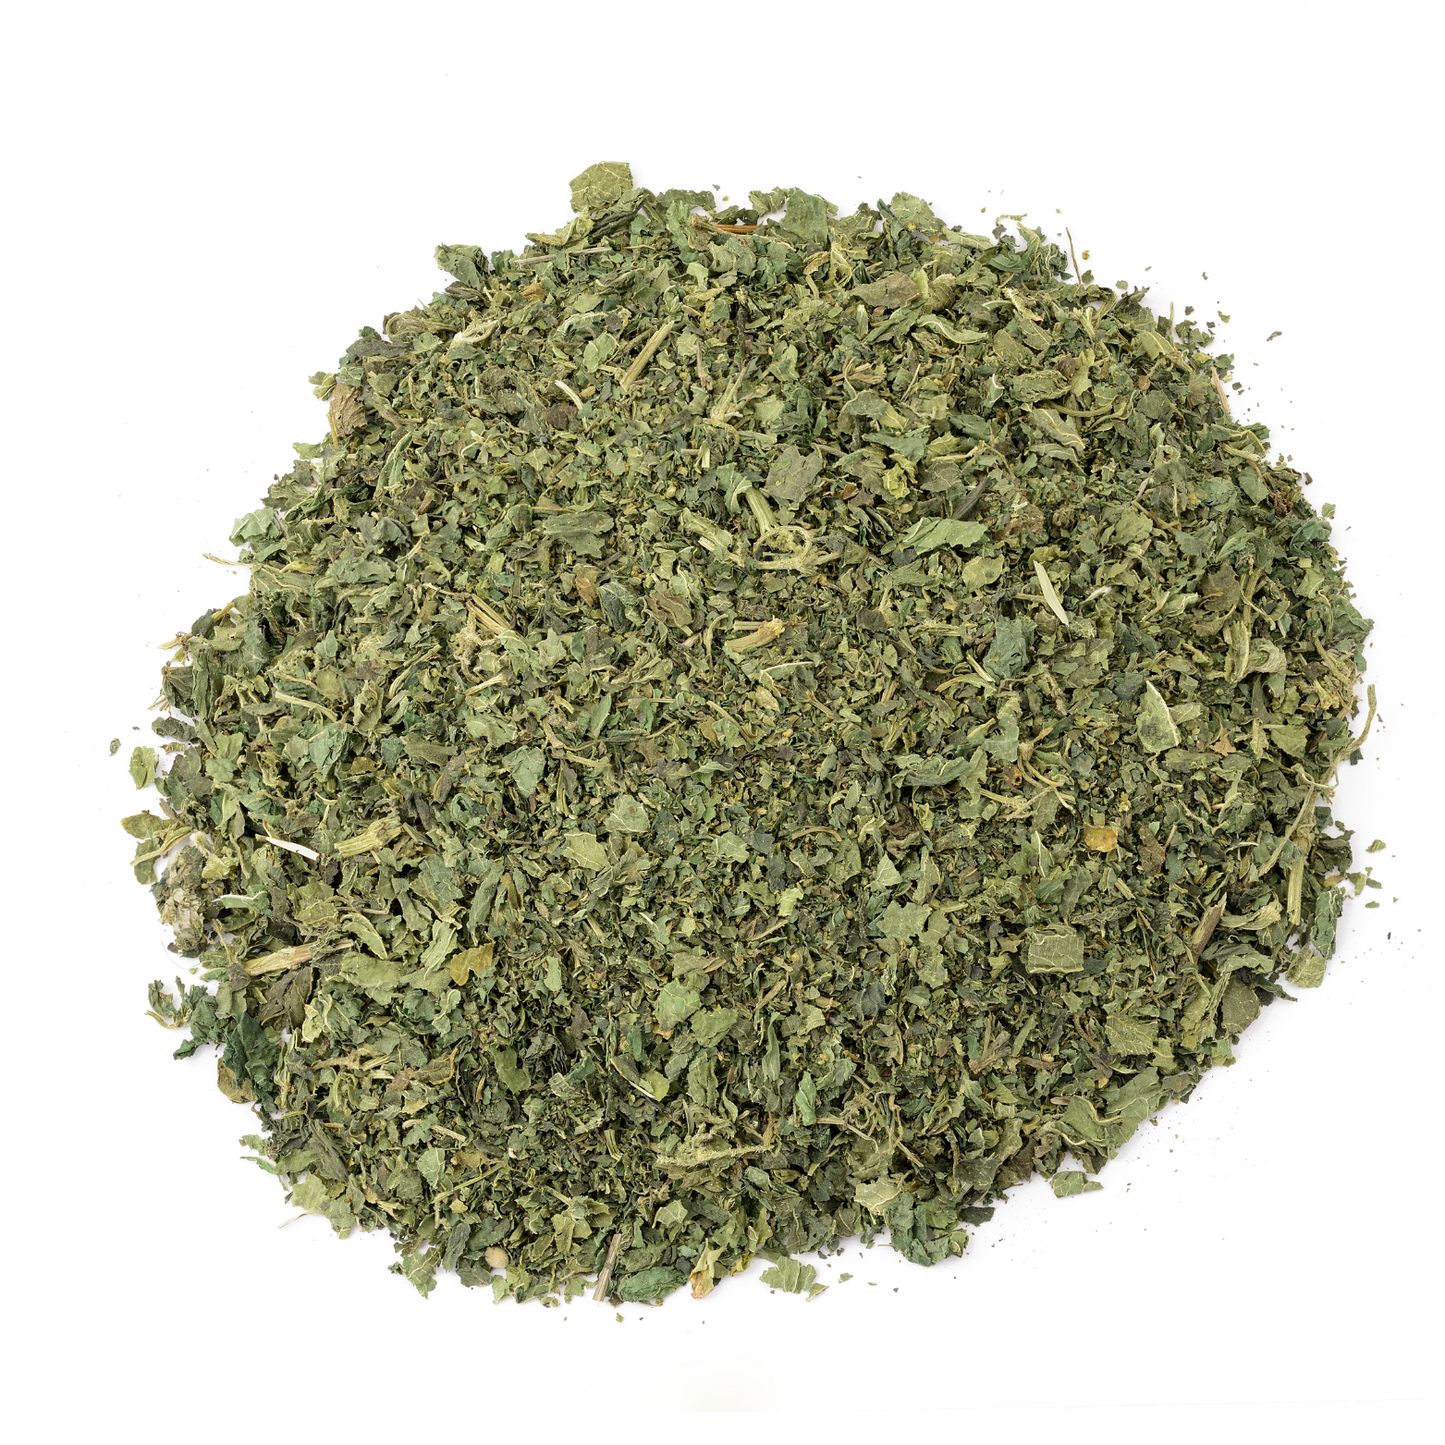 Witchy Pooh's Stinging Nettle Leaf Herb For Protection from Harm, Ward Off Evil, Reverse Curses-1